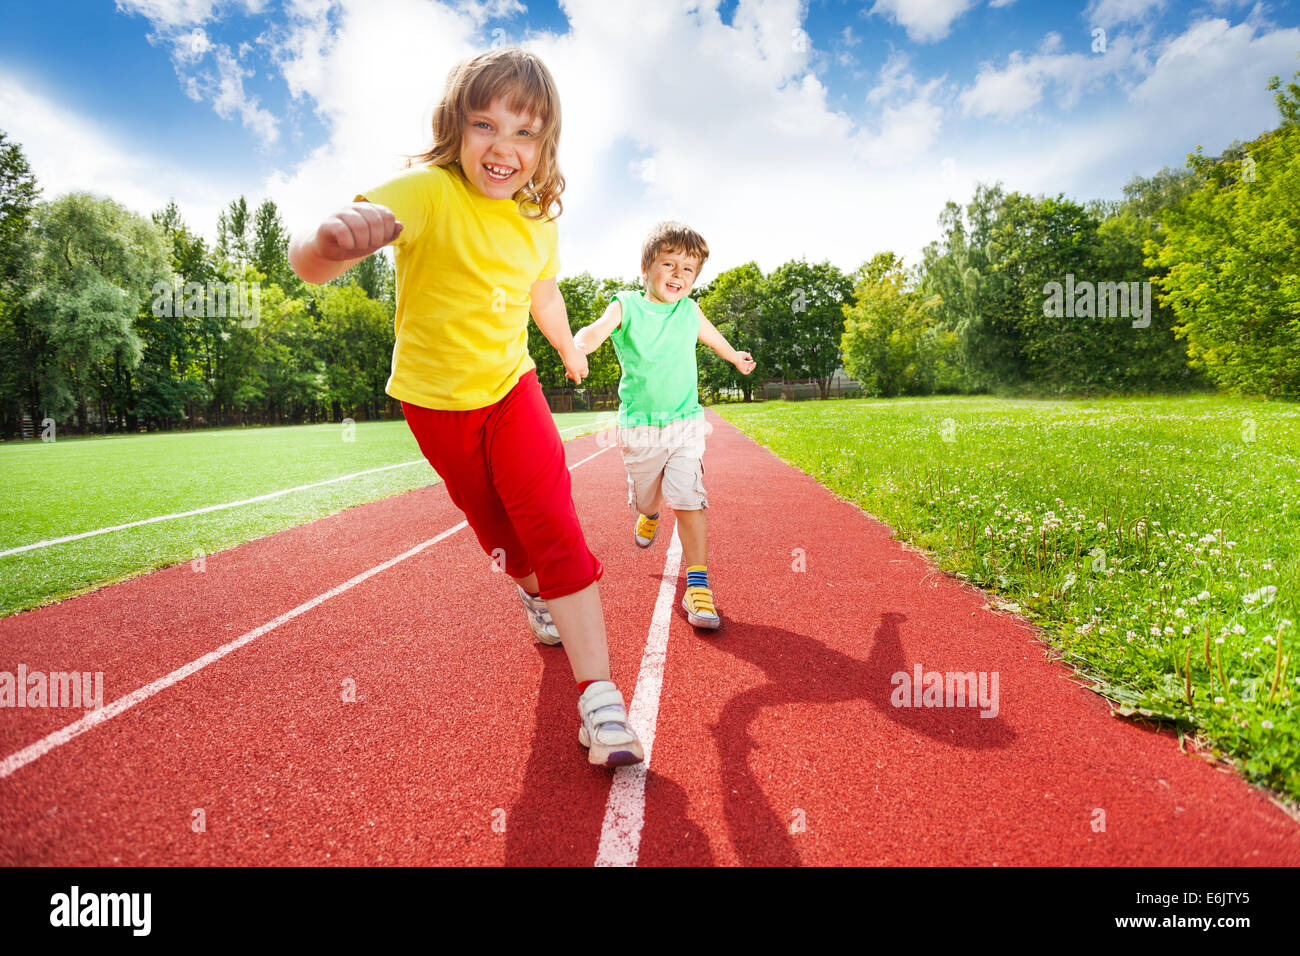 Two children holding hands running together Stock Photo